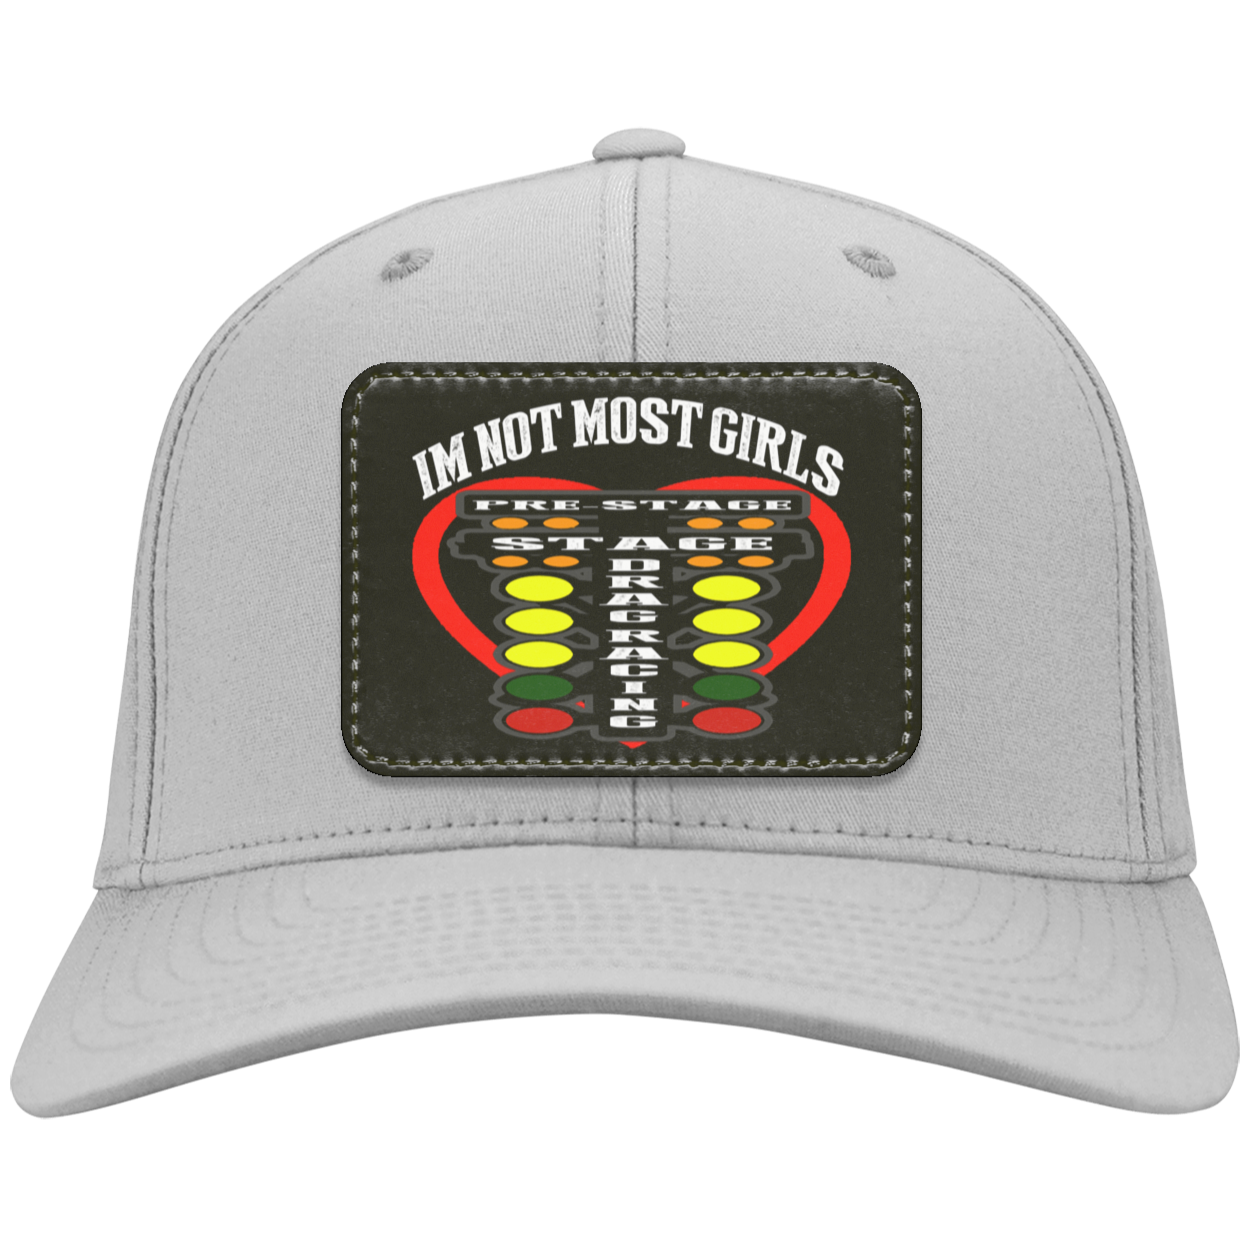 I'm Not Most Girls Drag Racing Twill Cap - Patch